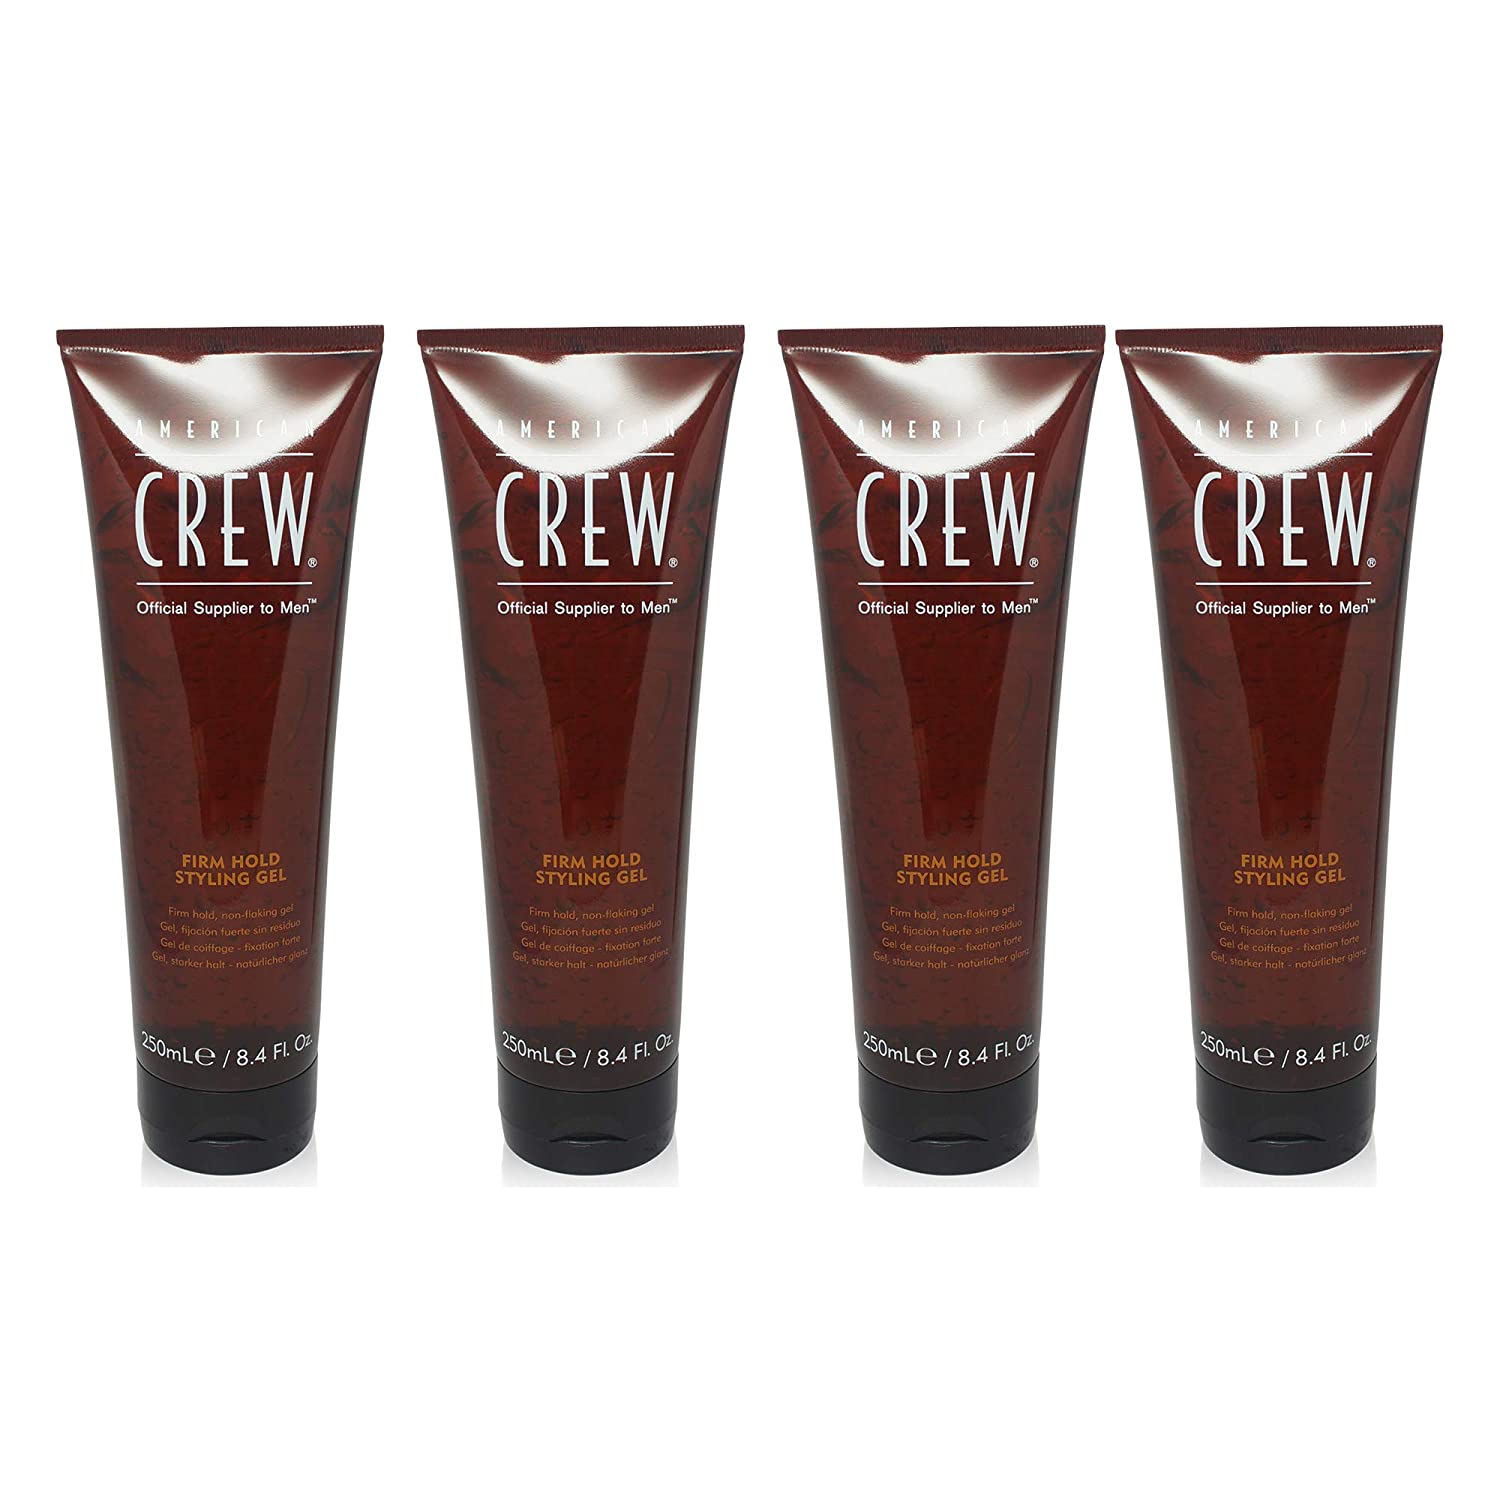 American Crew Firm Hold Gel 8.4 Oz (Pack of 4) by American Crew